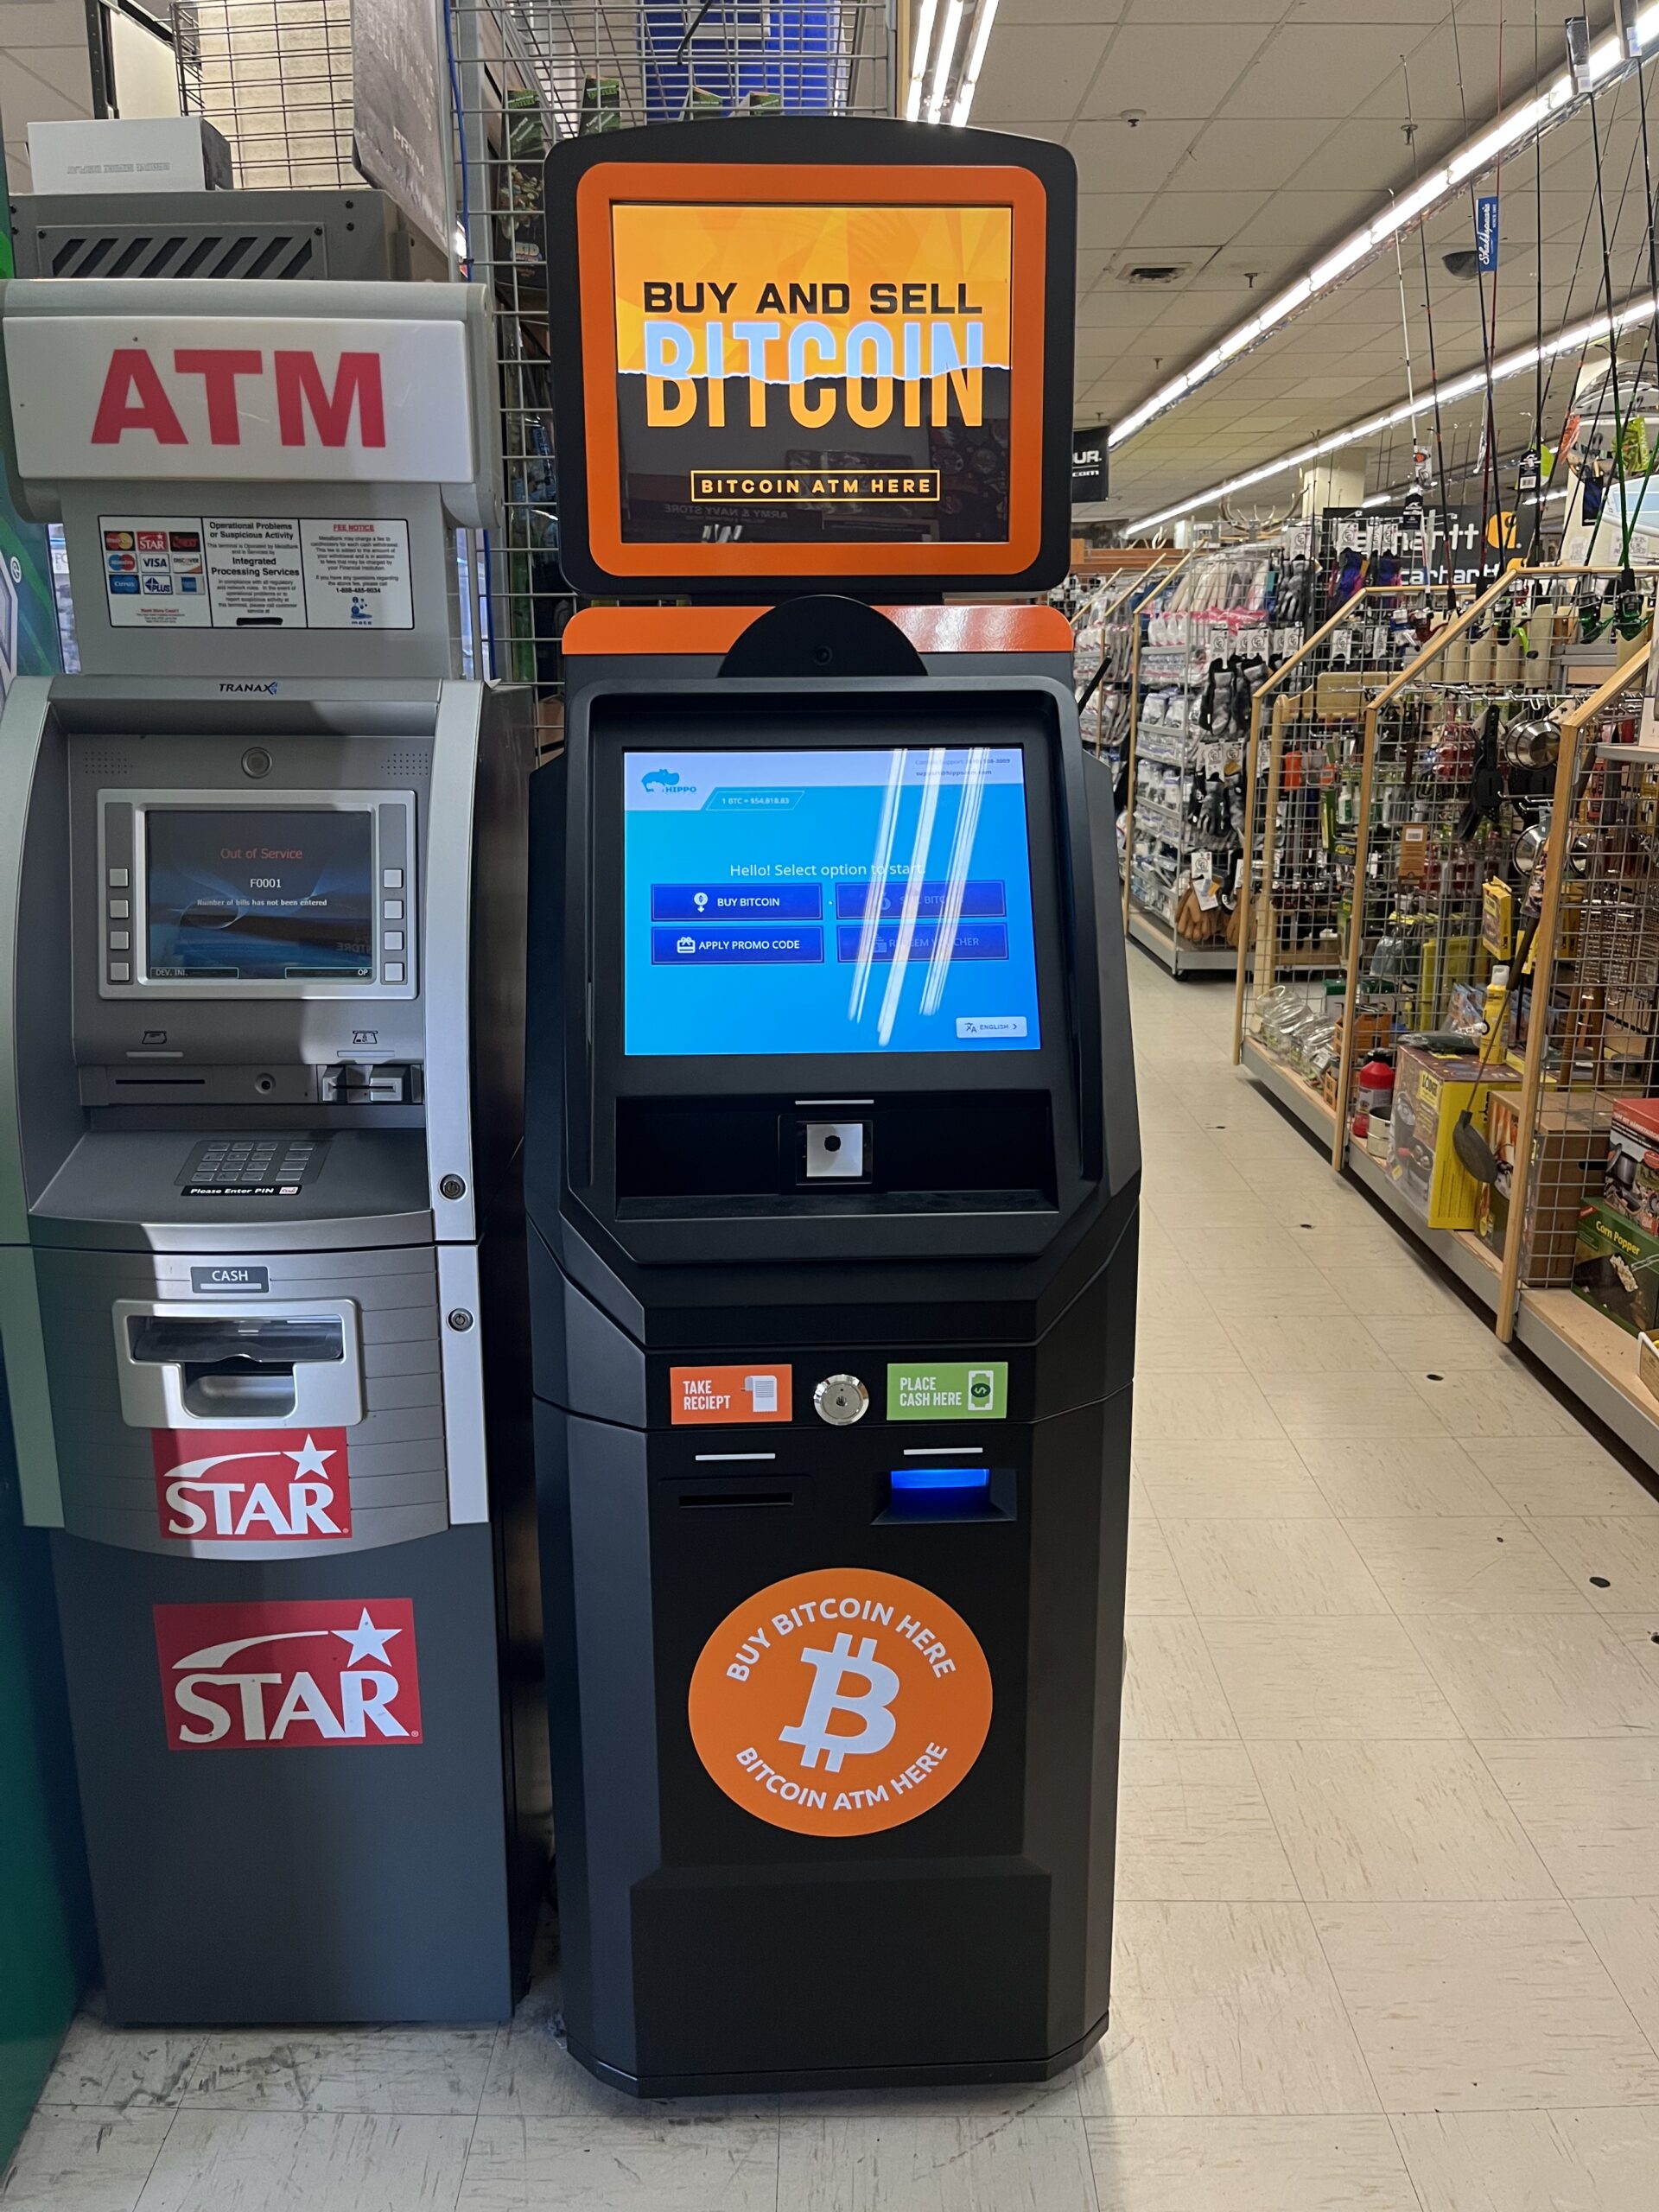 Bitcoin ATM Army and navy store Allentown